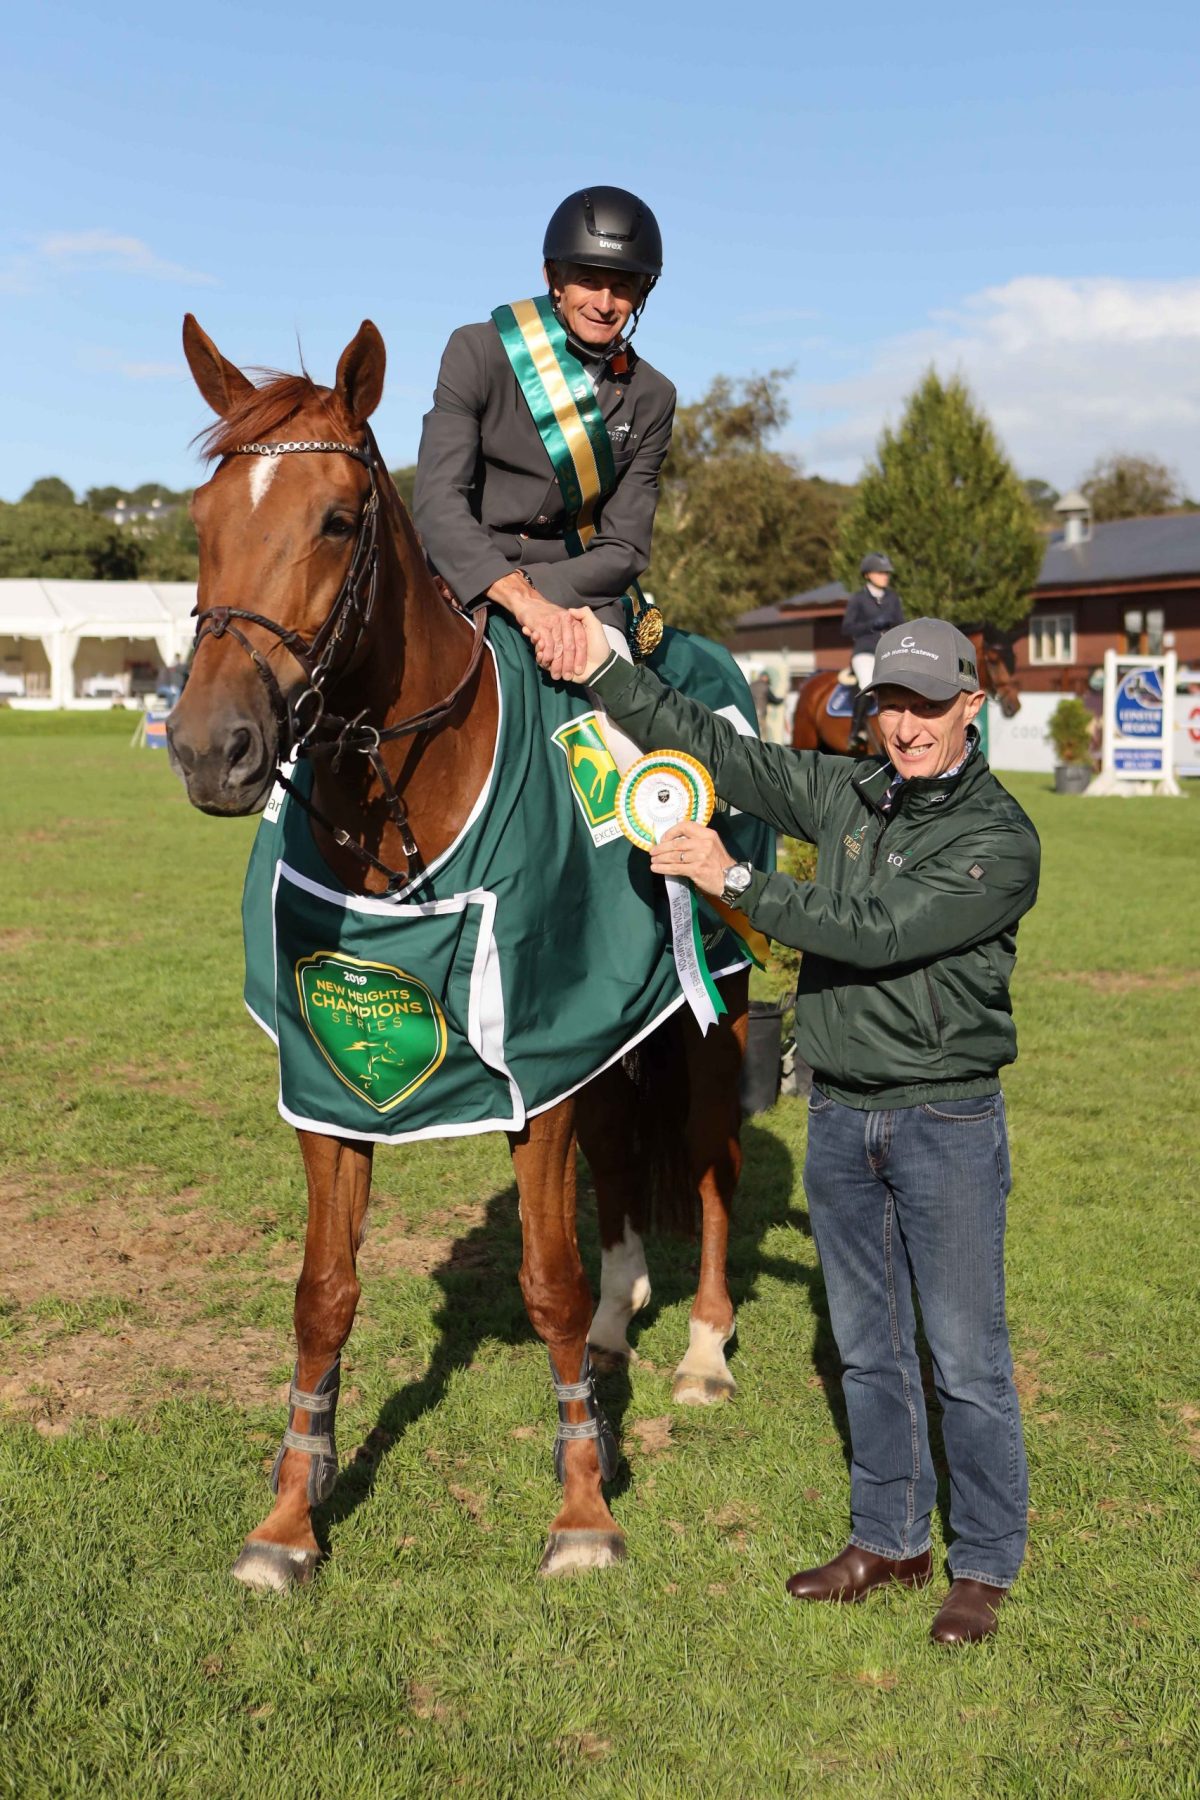 Francis Connors crowned 2019 New Heights Champions Series winner